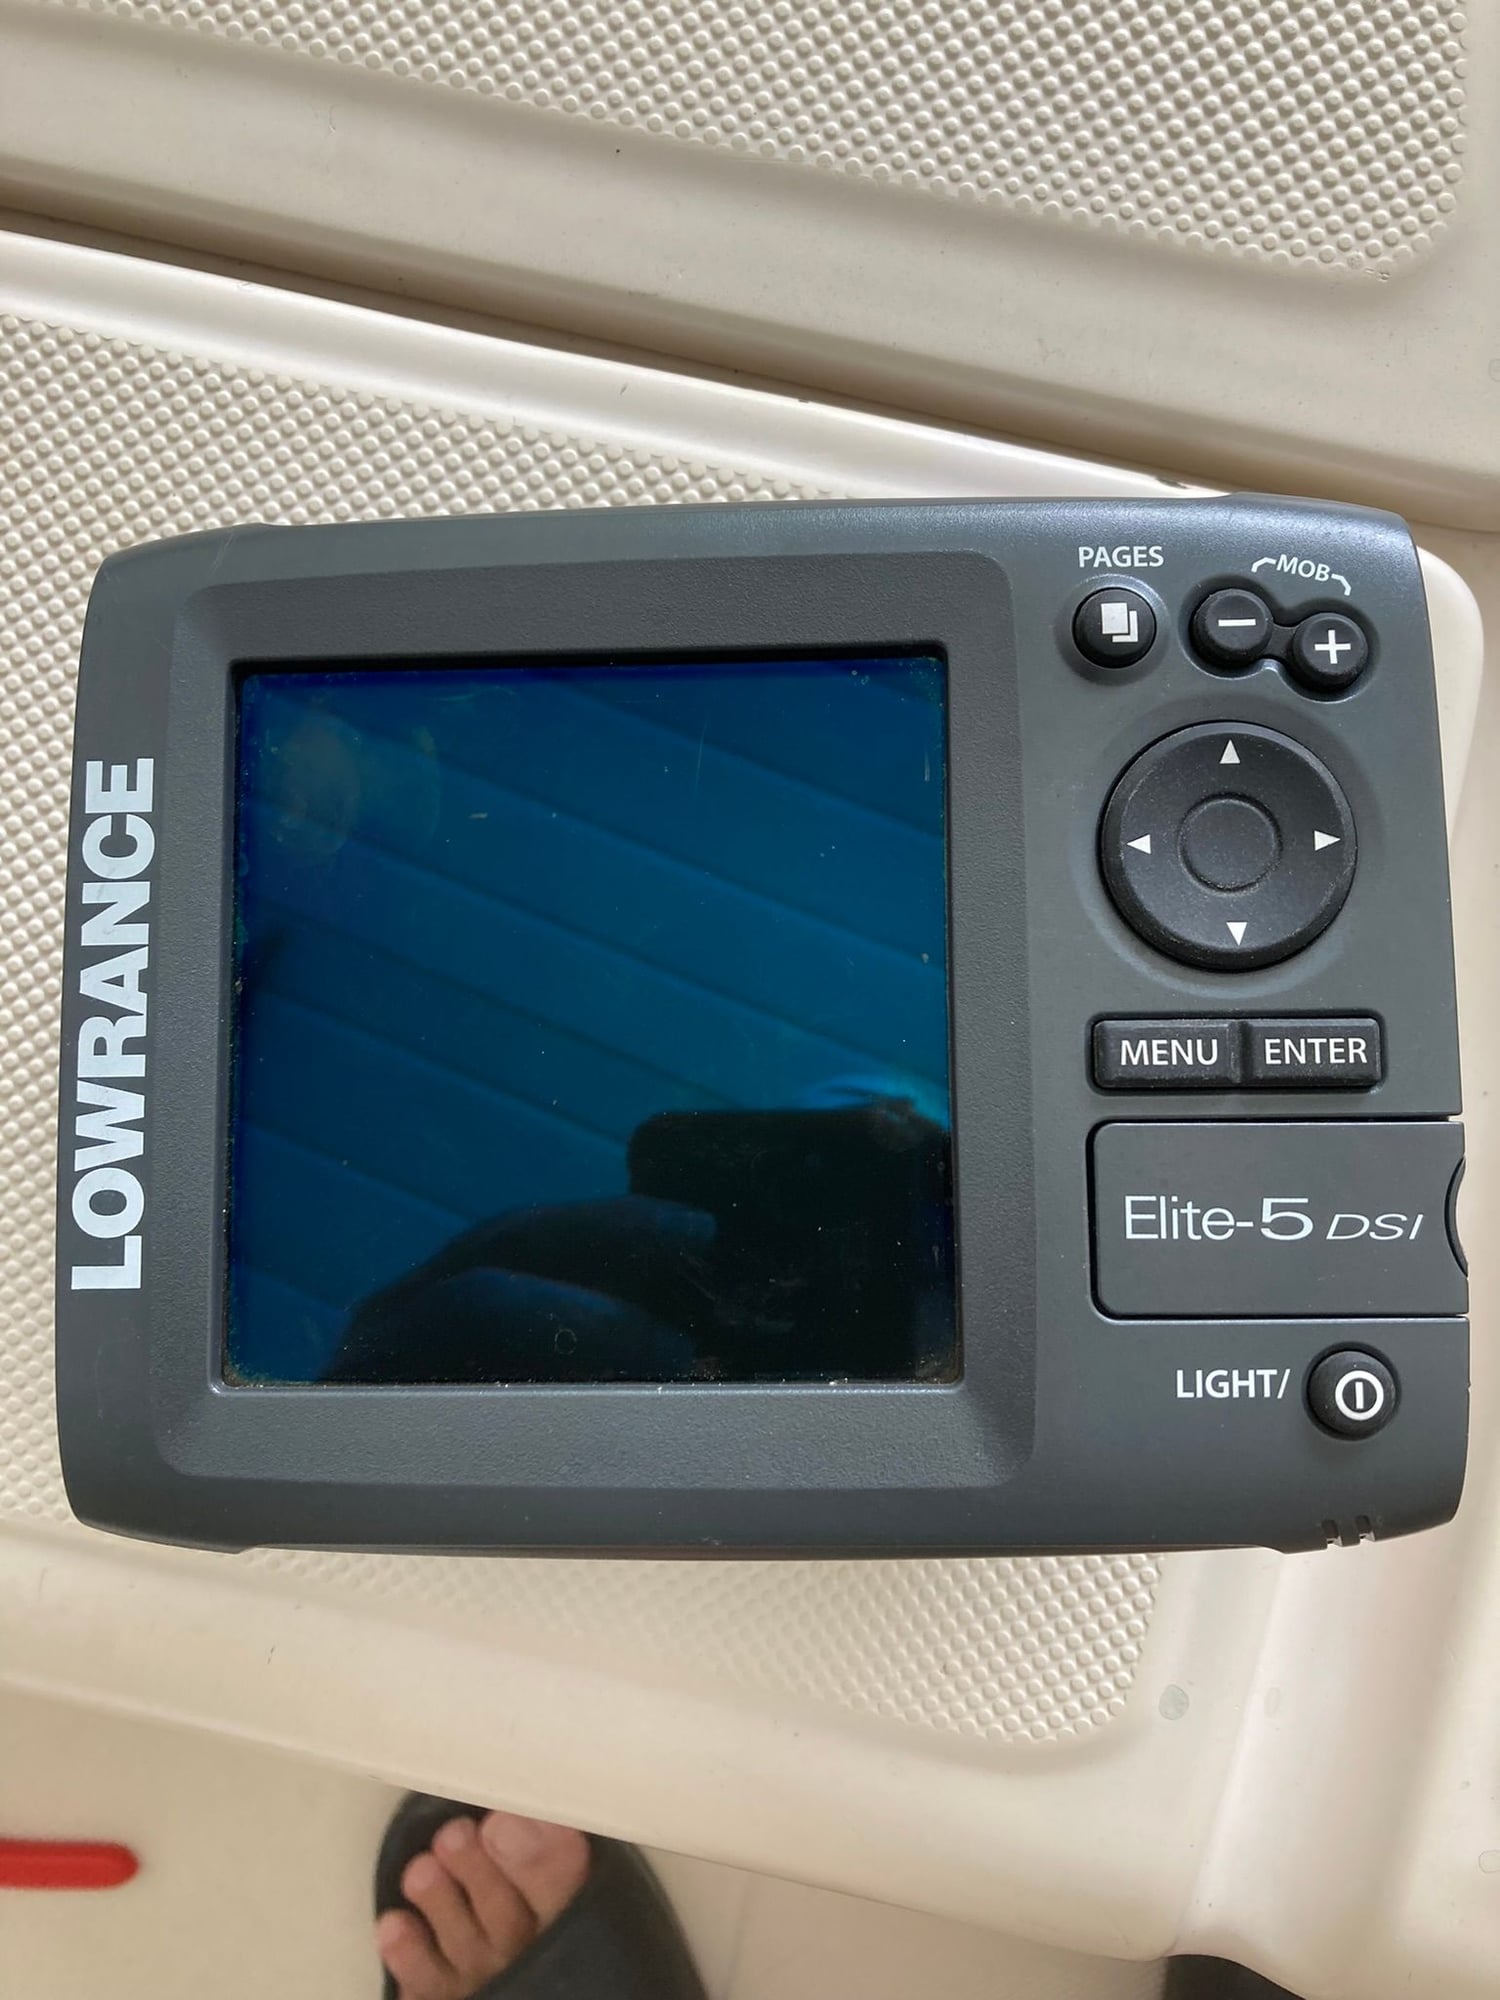 Lowrance not powering on.. - The Hull Truth - Boating and Fishing Forum